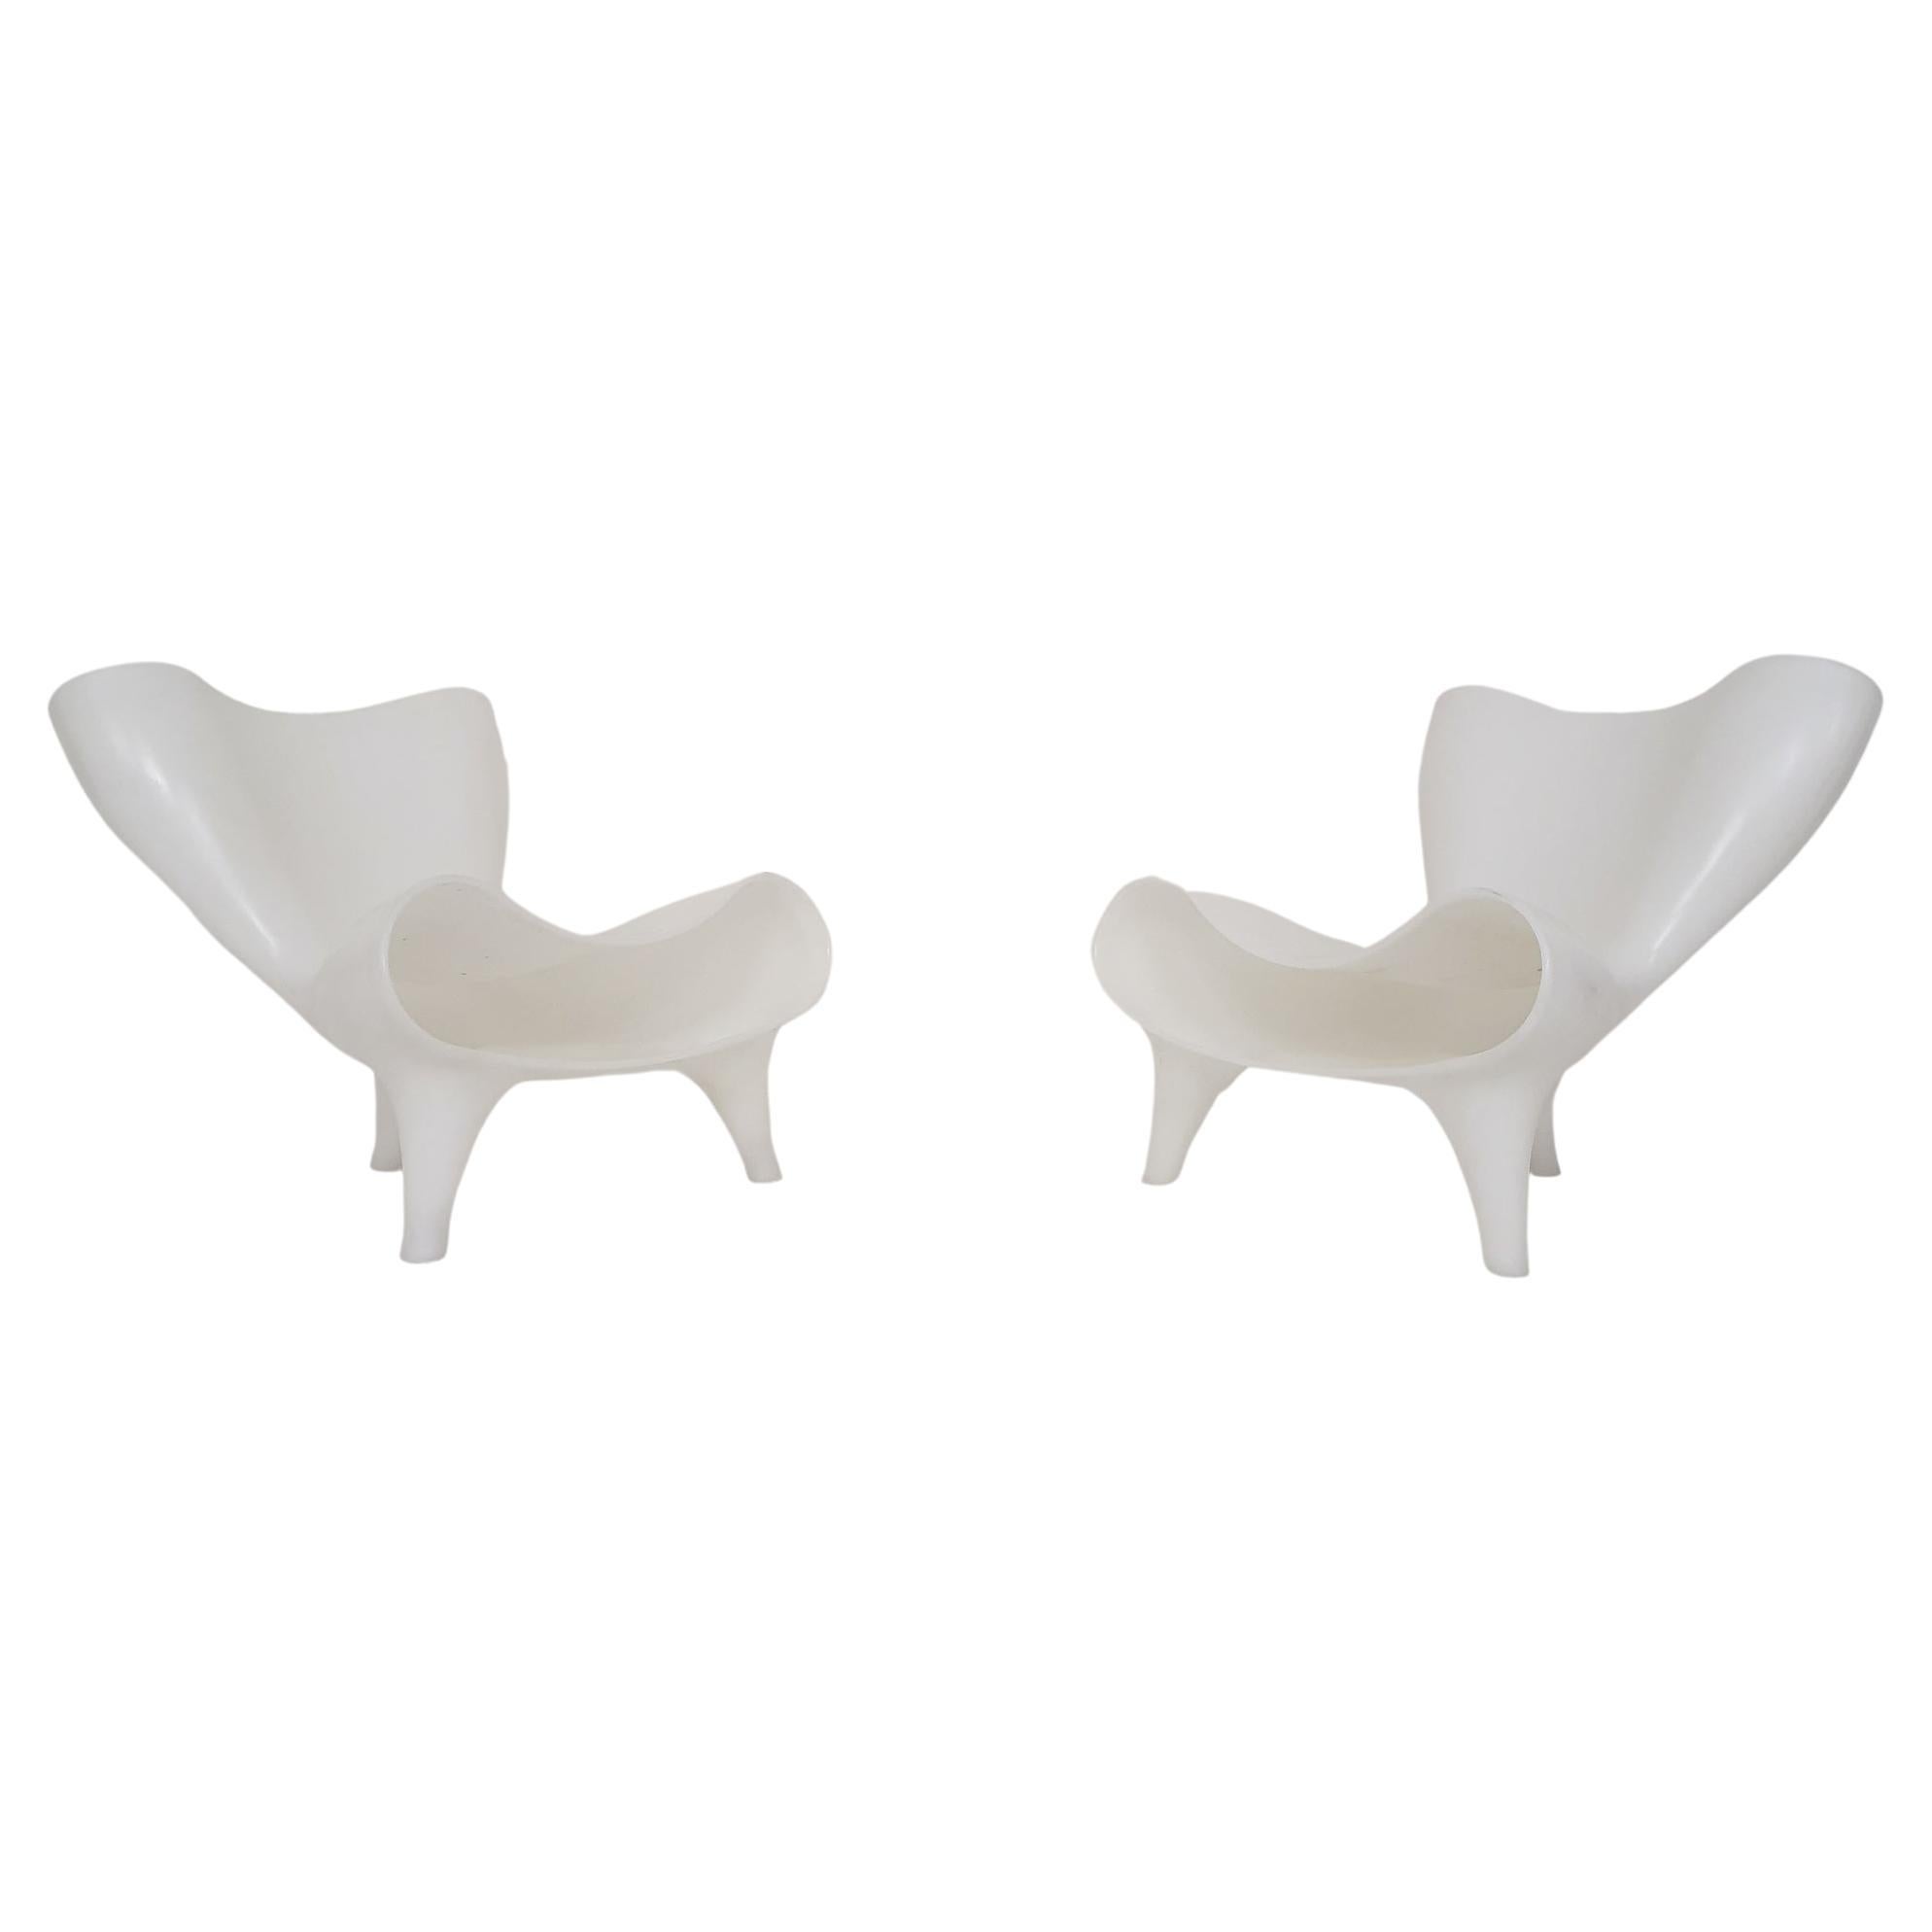 Marc Newson for Cappellini “Orgone” White Plastic Lounge Chairs, 2017